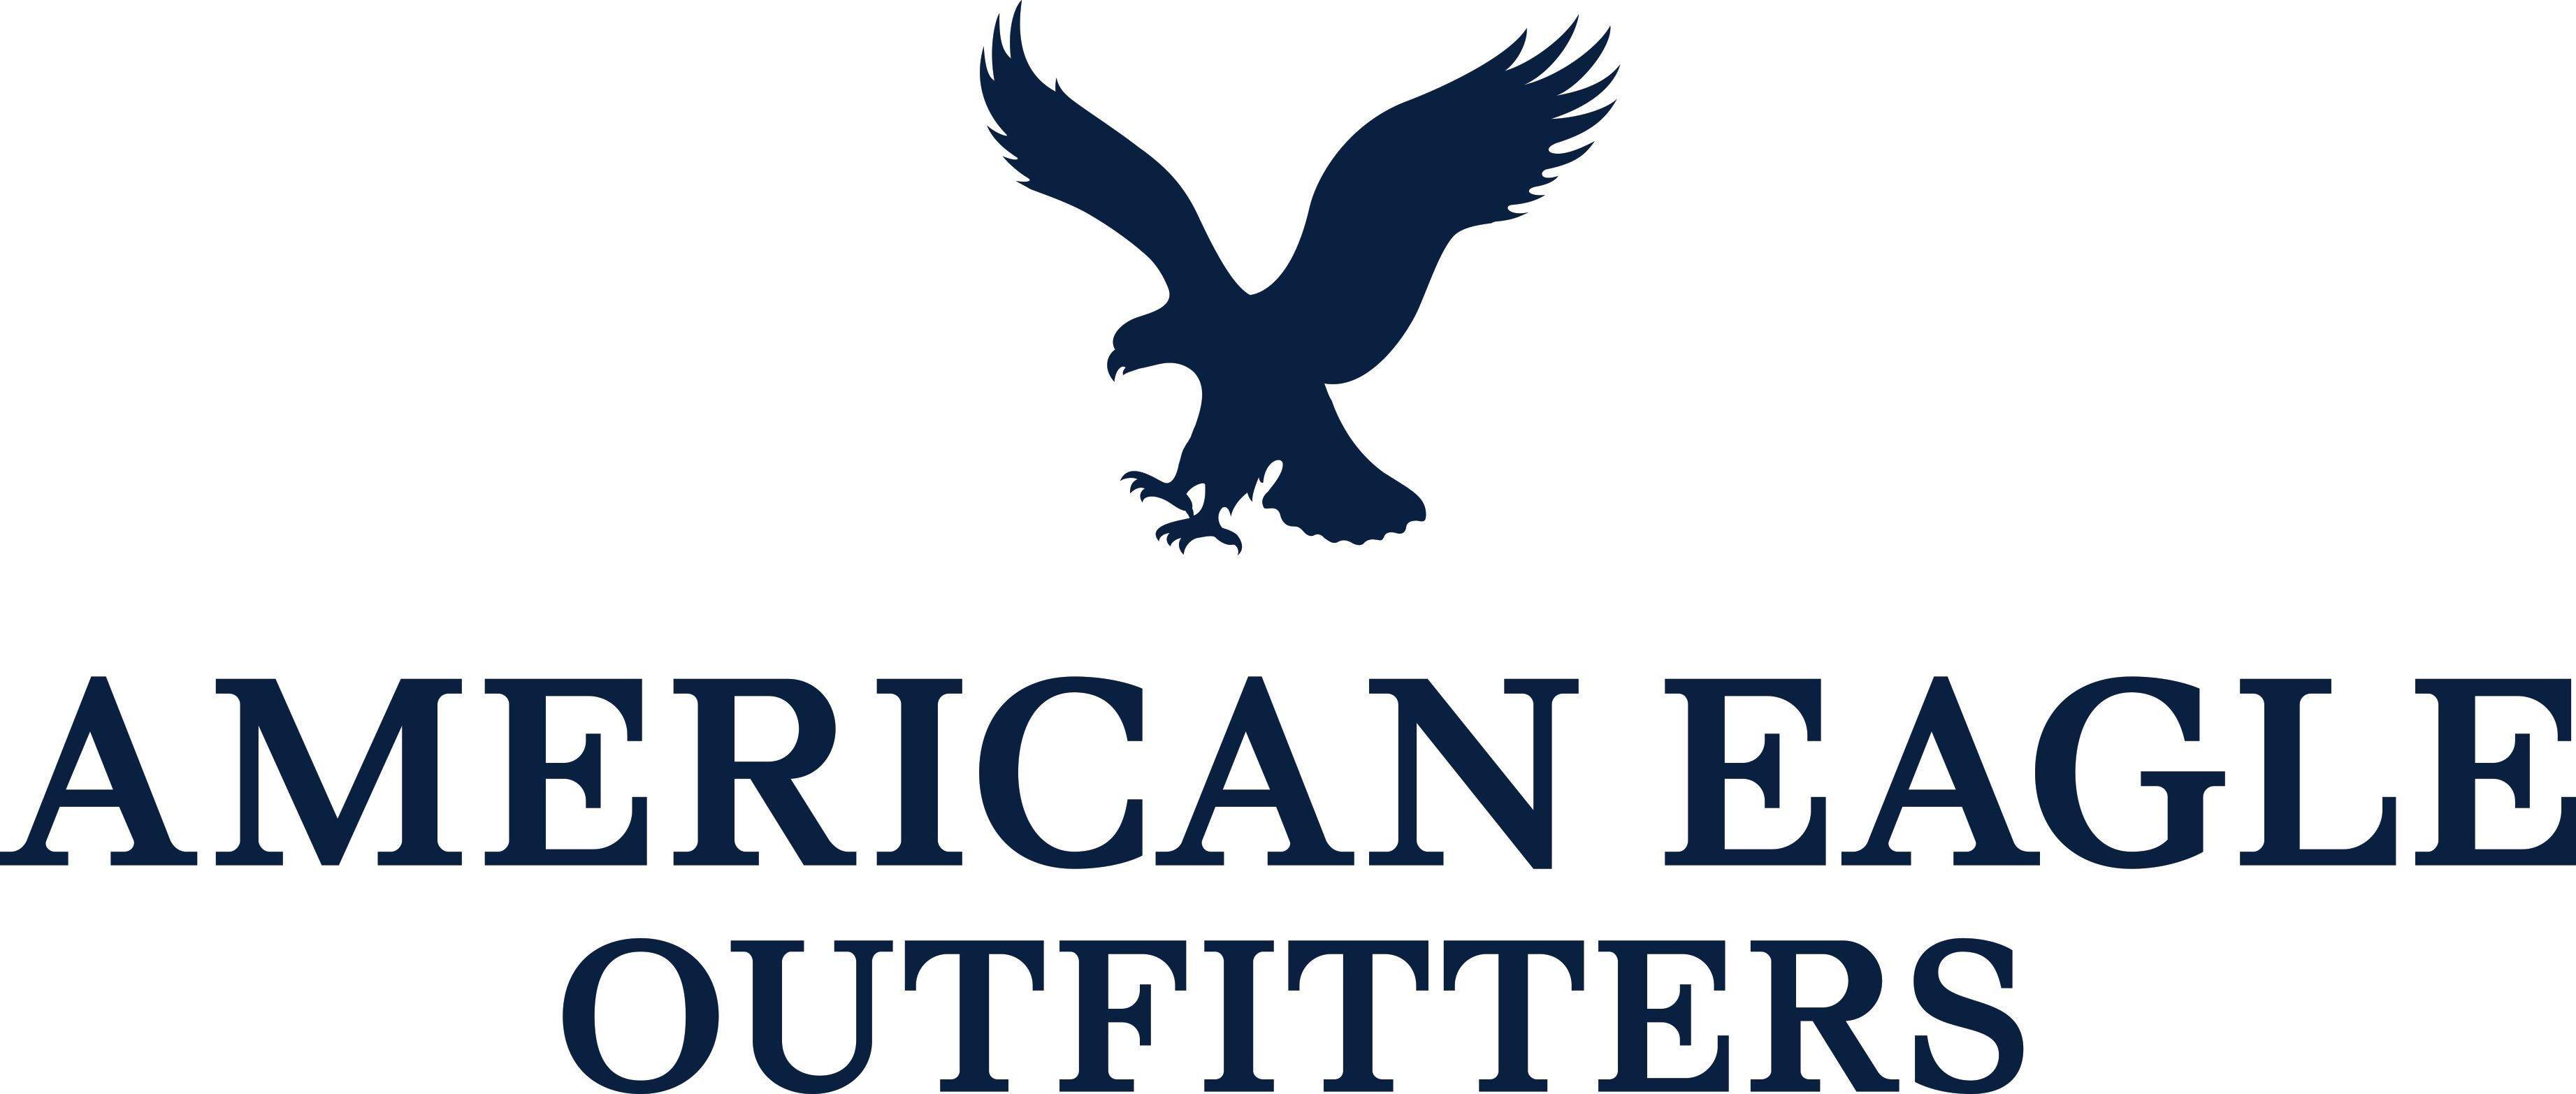 American Eagle Outfitters Logo - American Eagle Outfitters Near 5-Year Highs; Some Thoughts ...